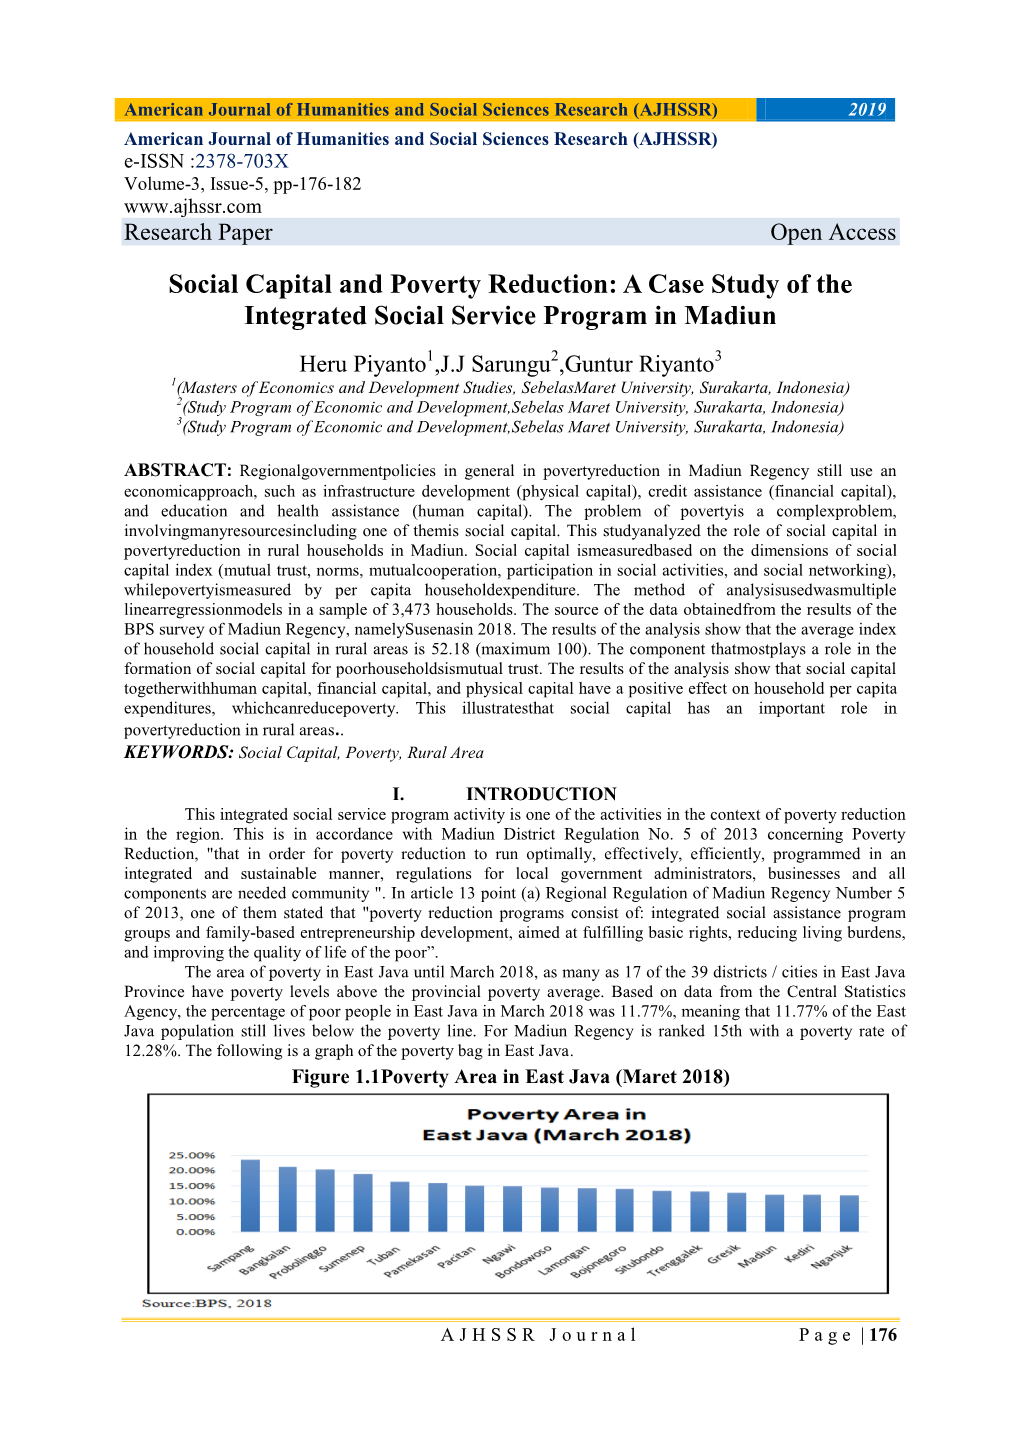 Social Capital and Poverty Reduction: a Case Study of the Integrated Social Service Program in Madiun